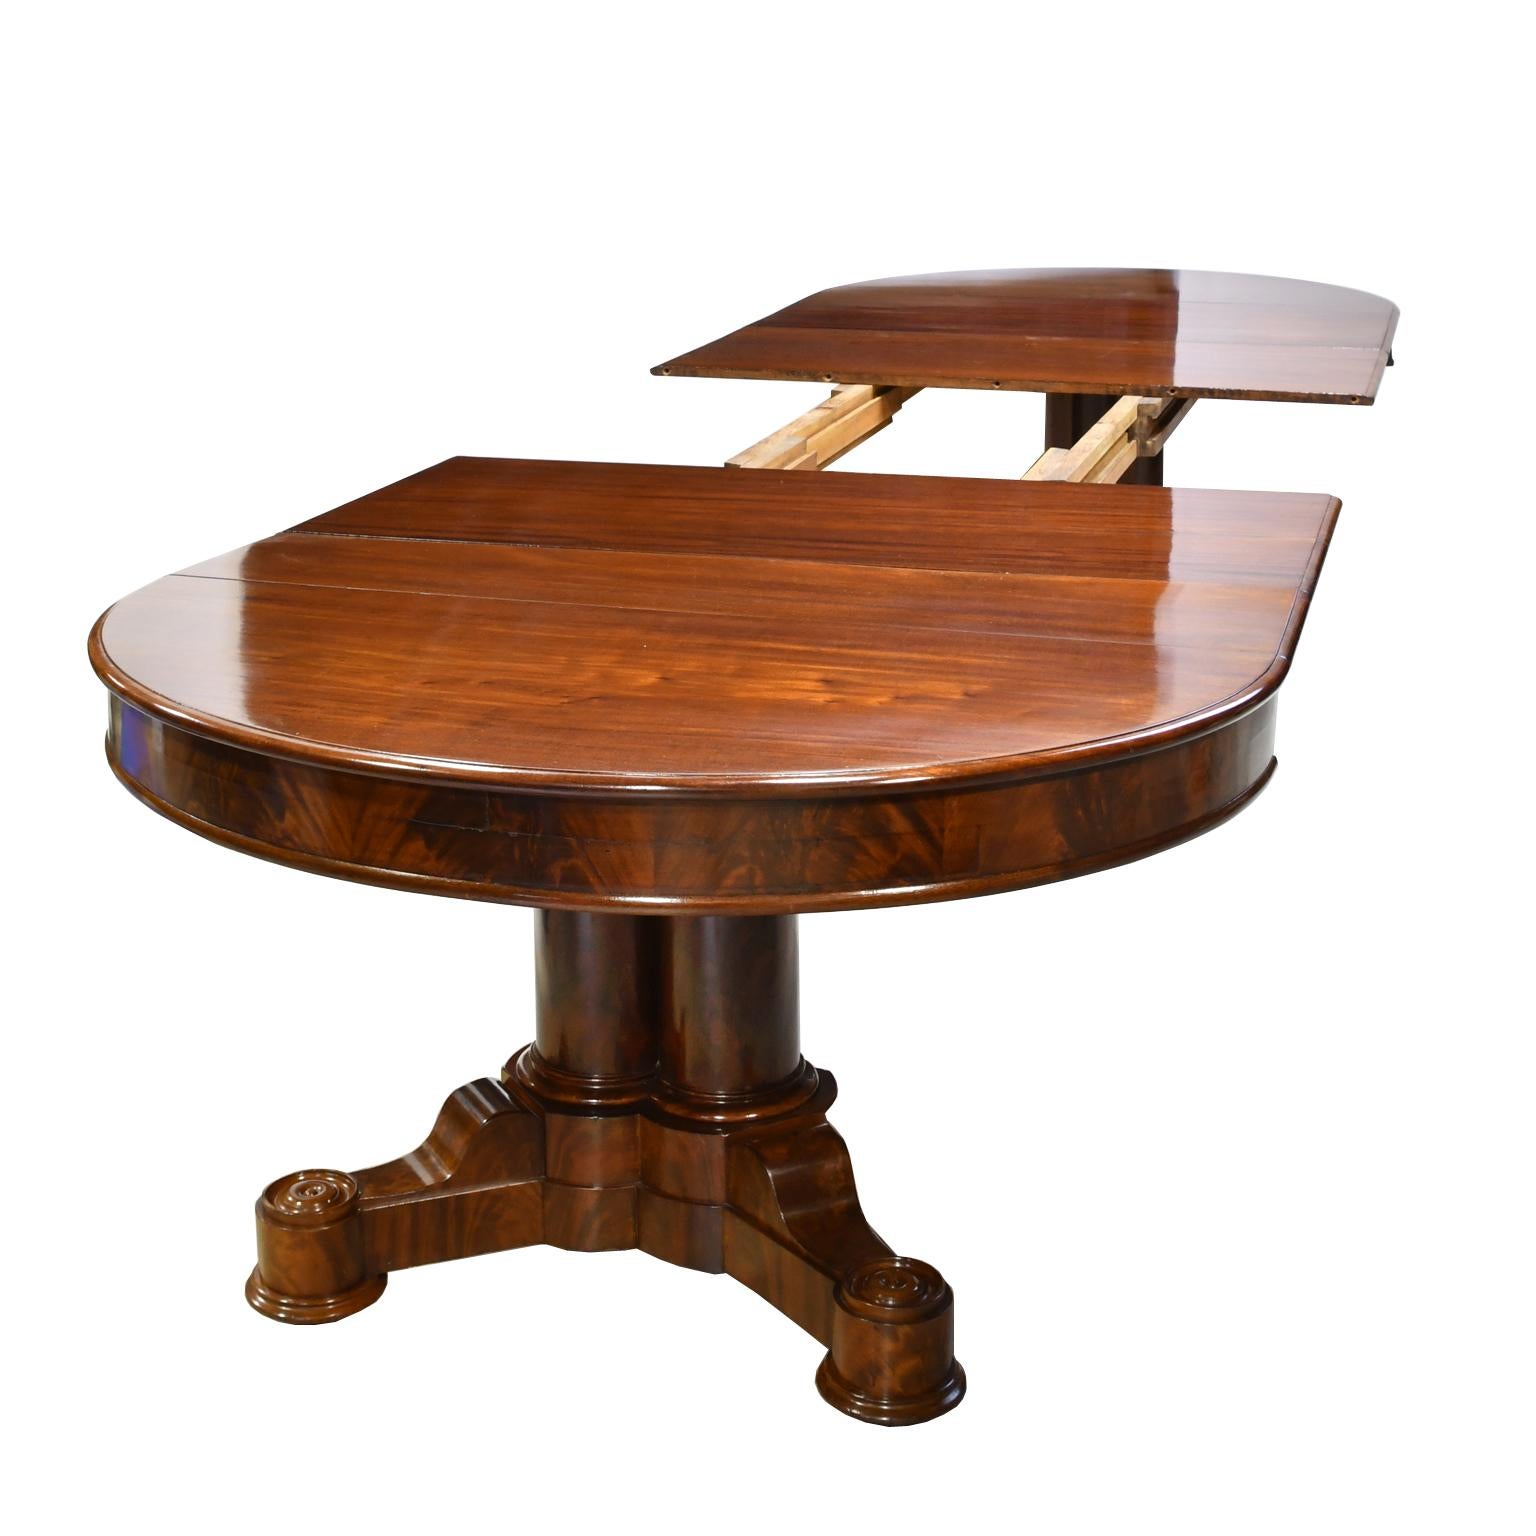 American Empire Oval Extension Dining Table in Mahogany with Pedestal Base 9